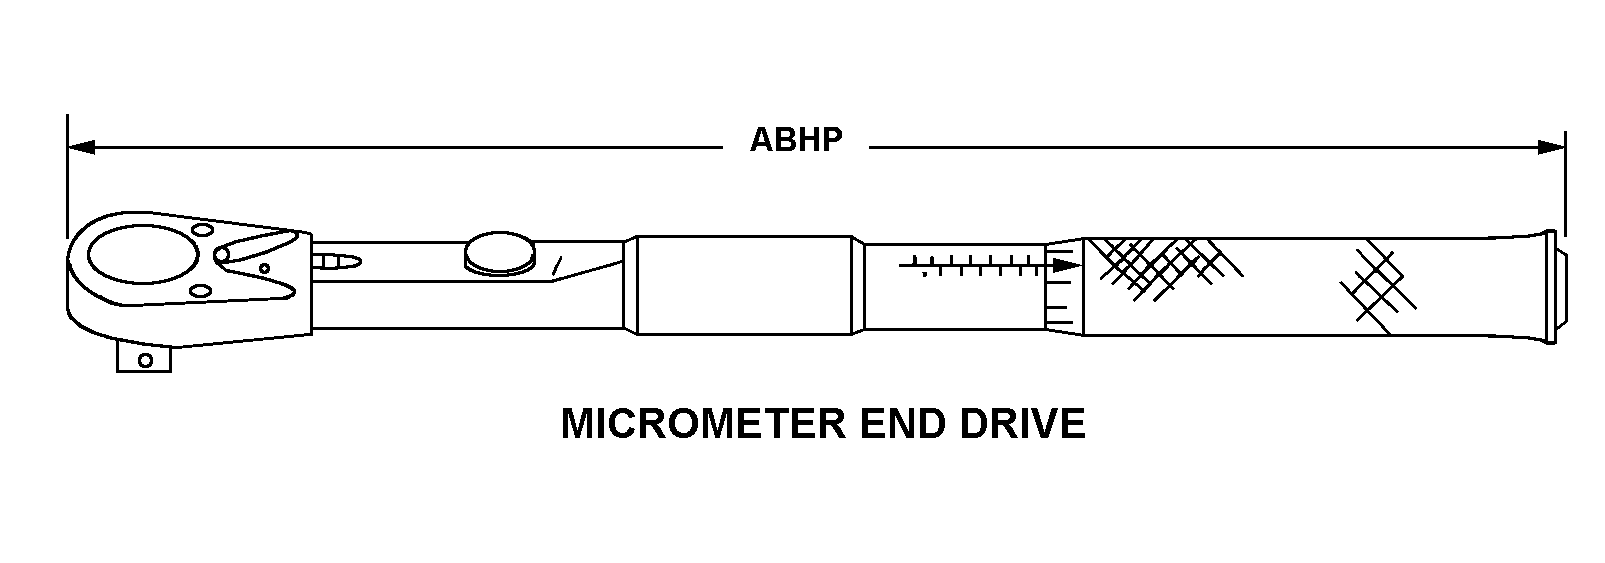 MICROMETER END DRIVE style nsn 5120-01-396-5954